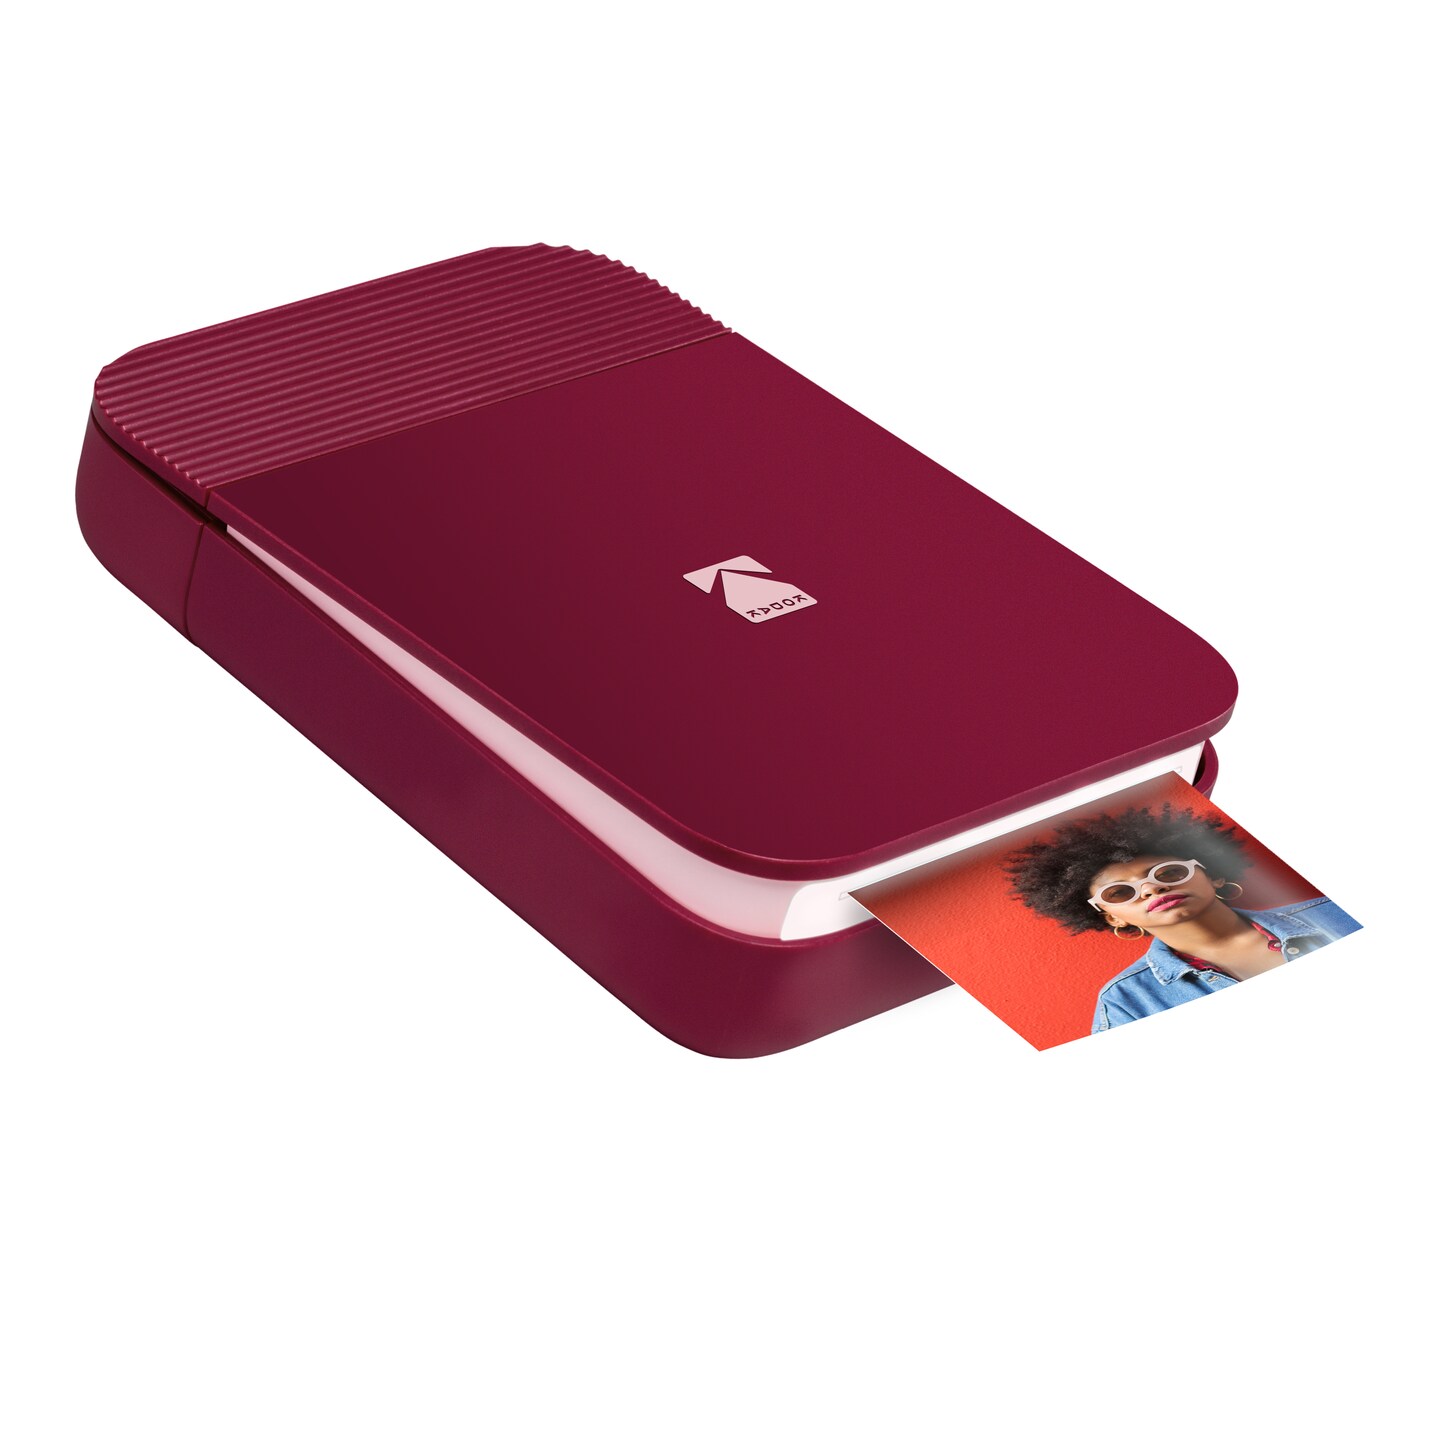 Kodak Smile Digital Instant Photo for iOS & Android with Bluetooth 2x3 Zink Zero Ink Technology | Michaels